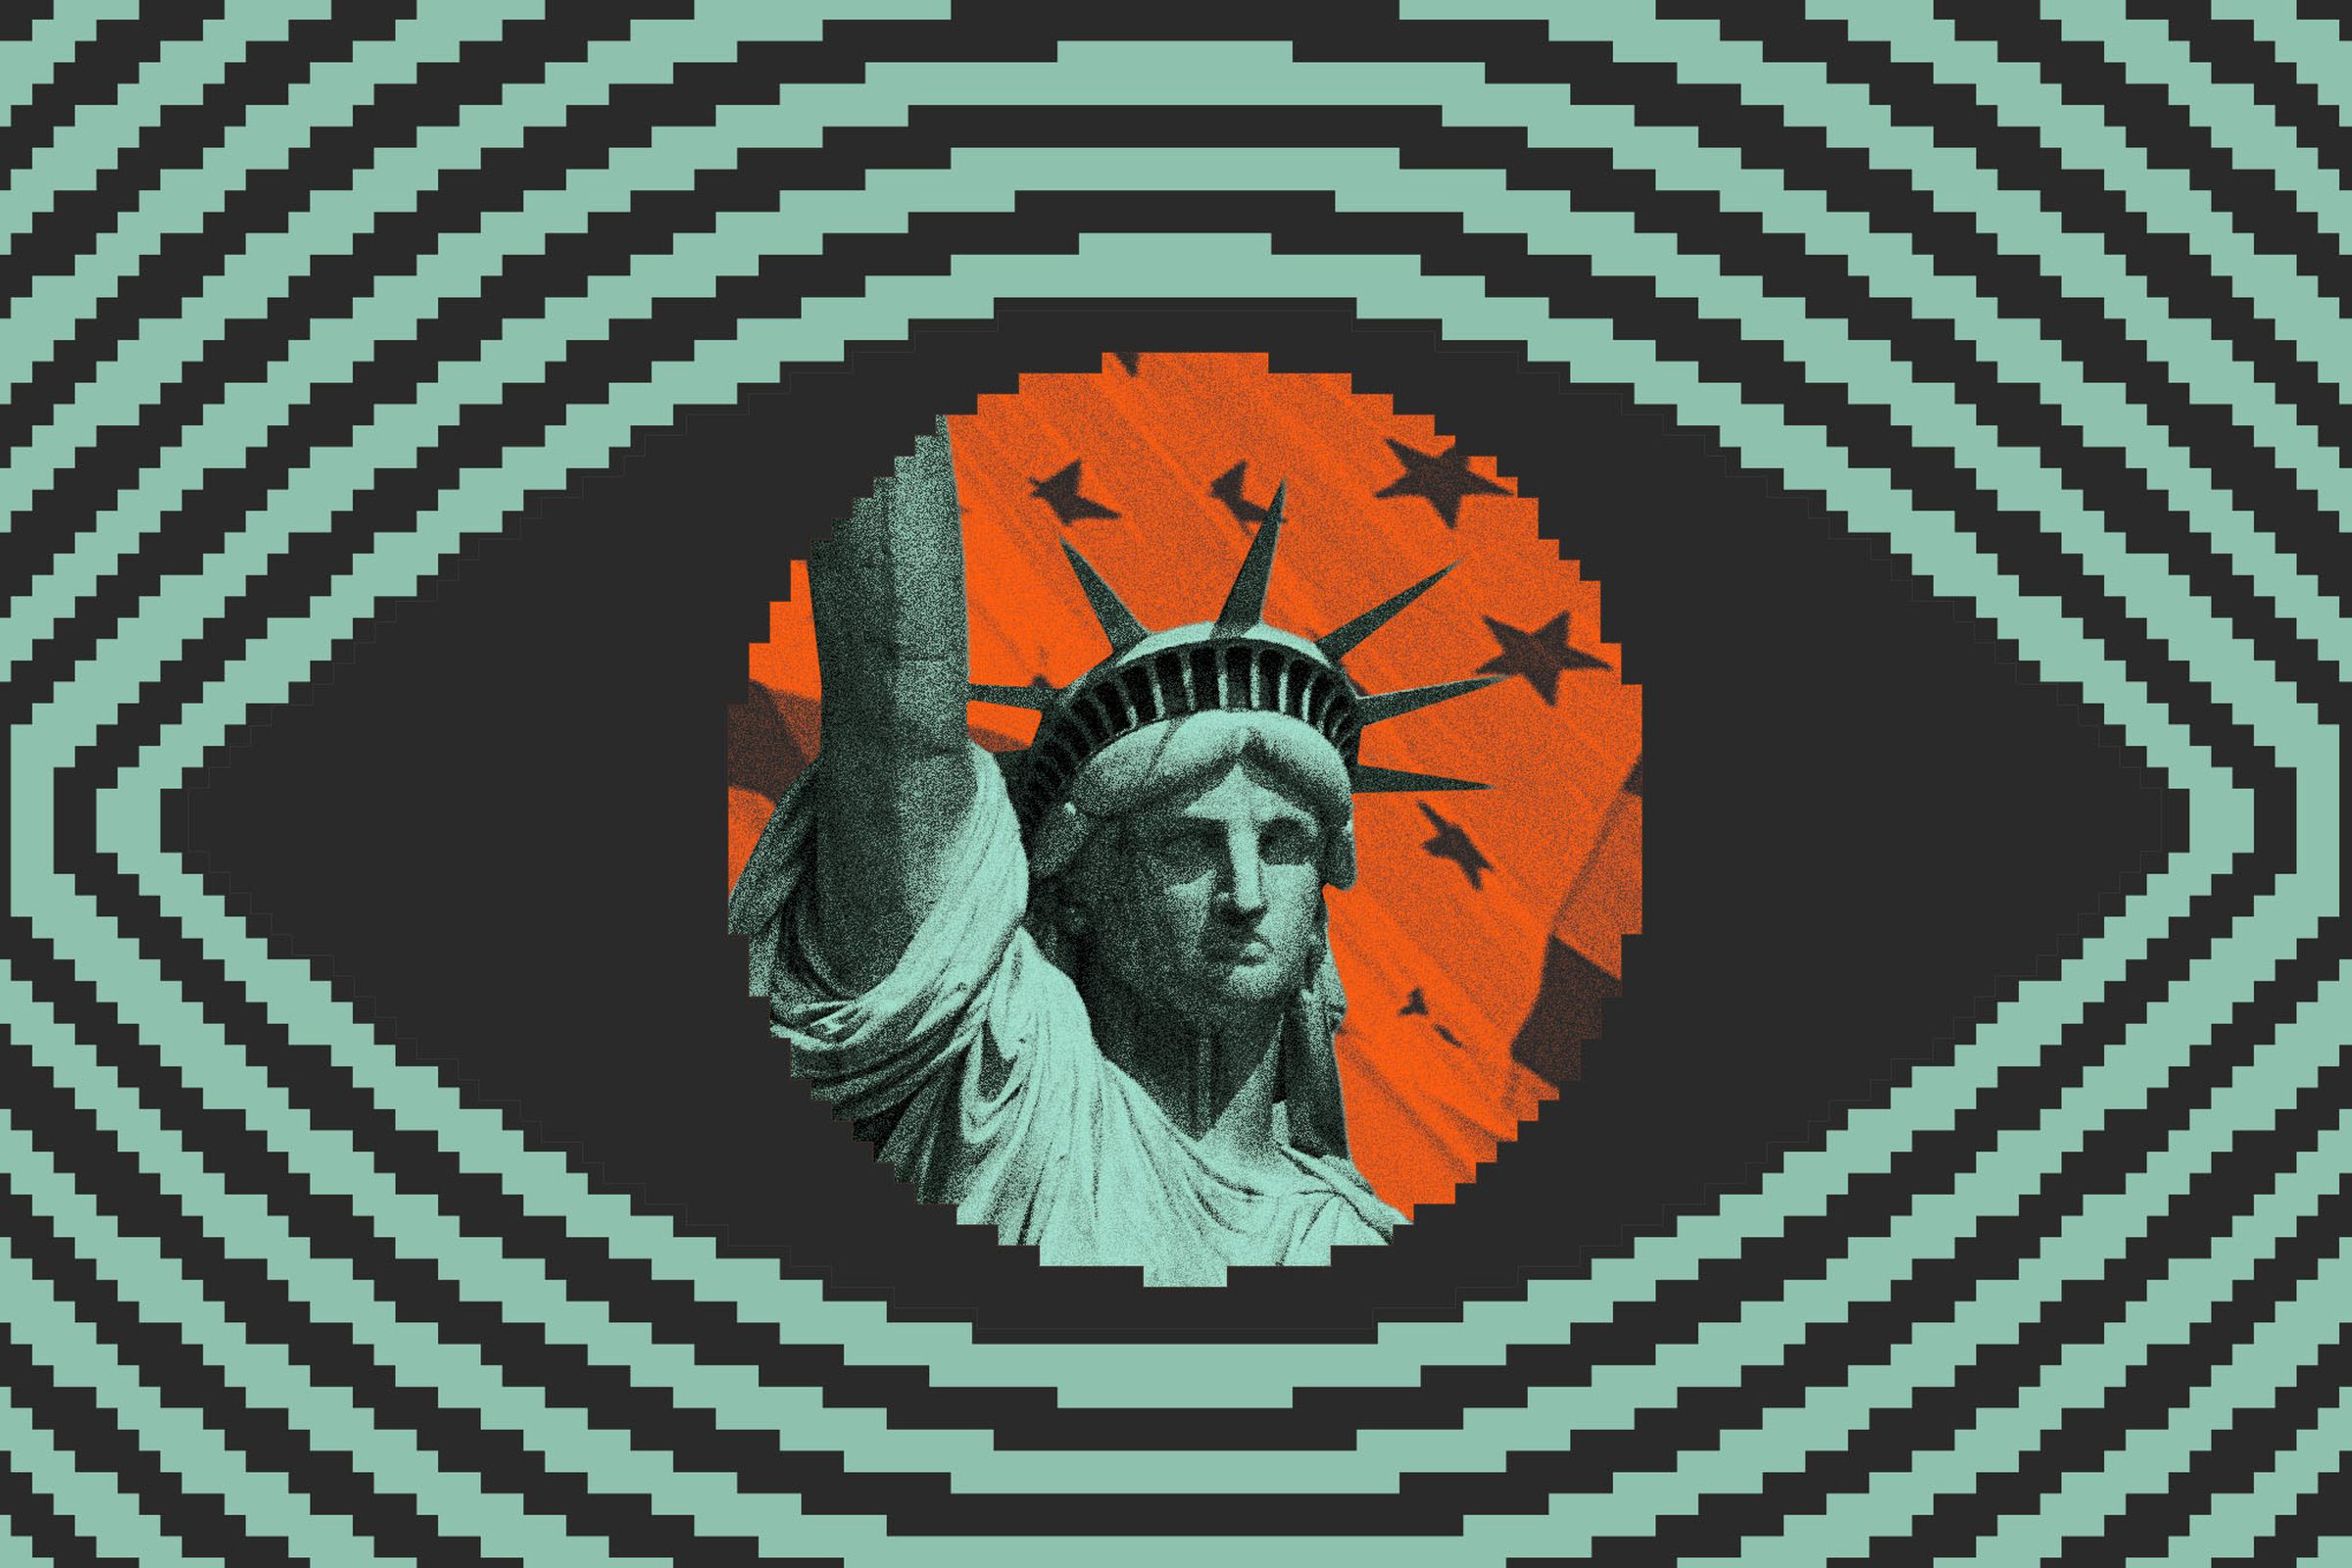 Photo collage of the Statue of Liberty inside the iris of an eye.